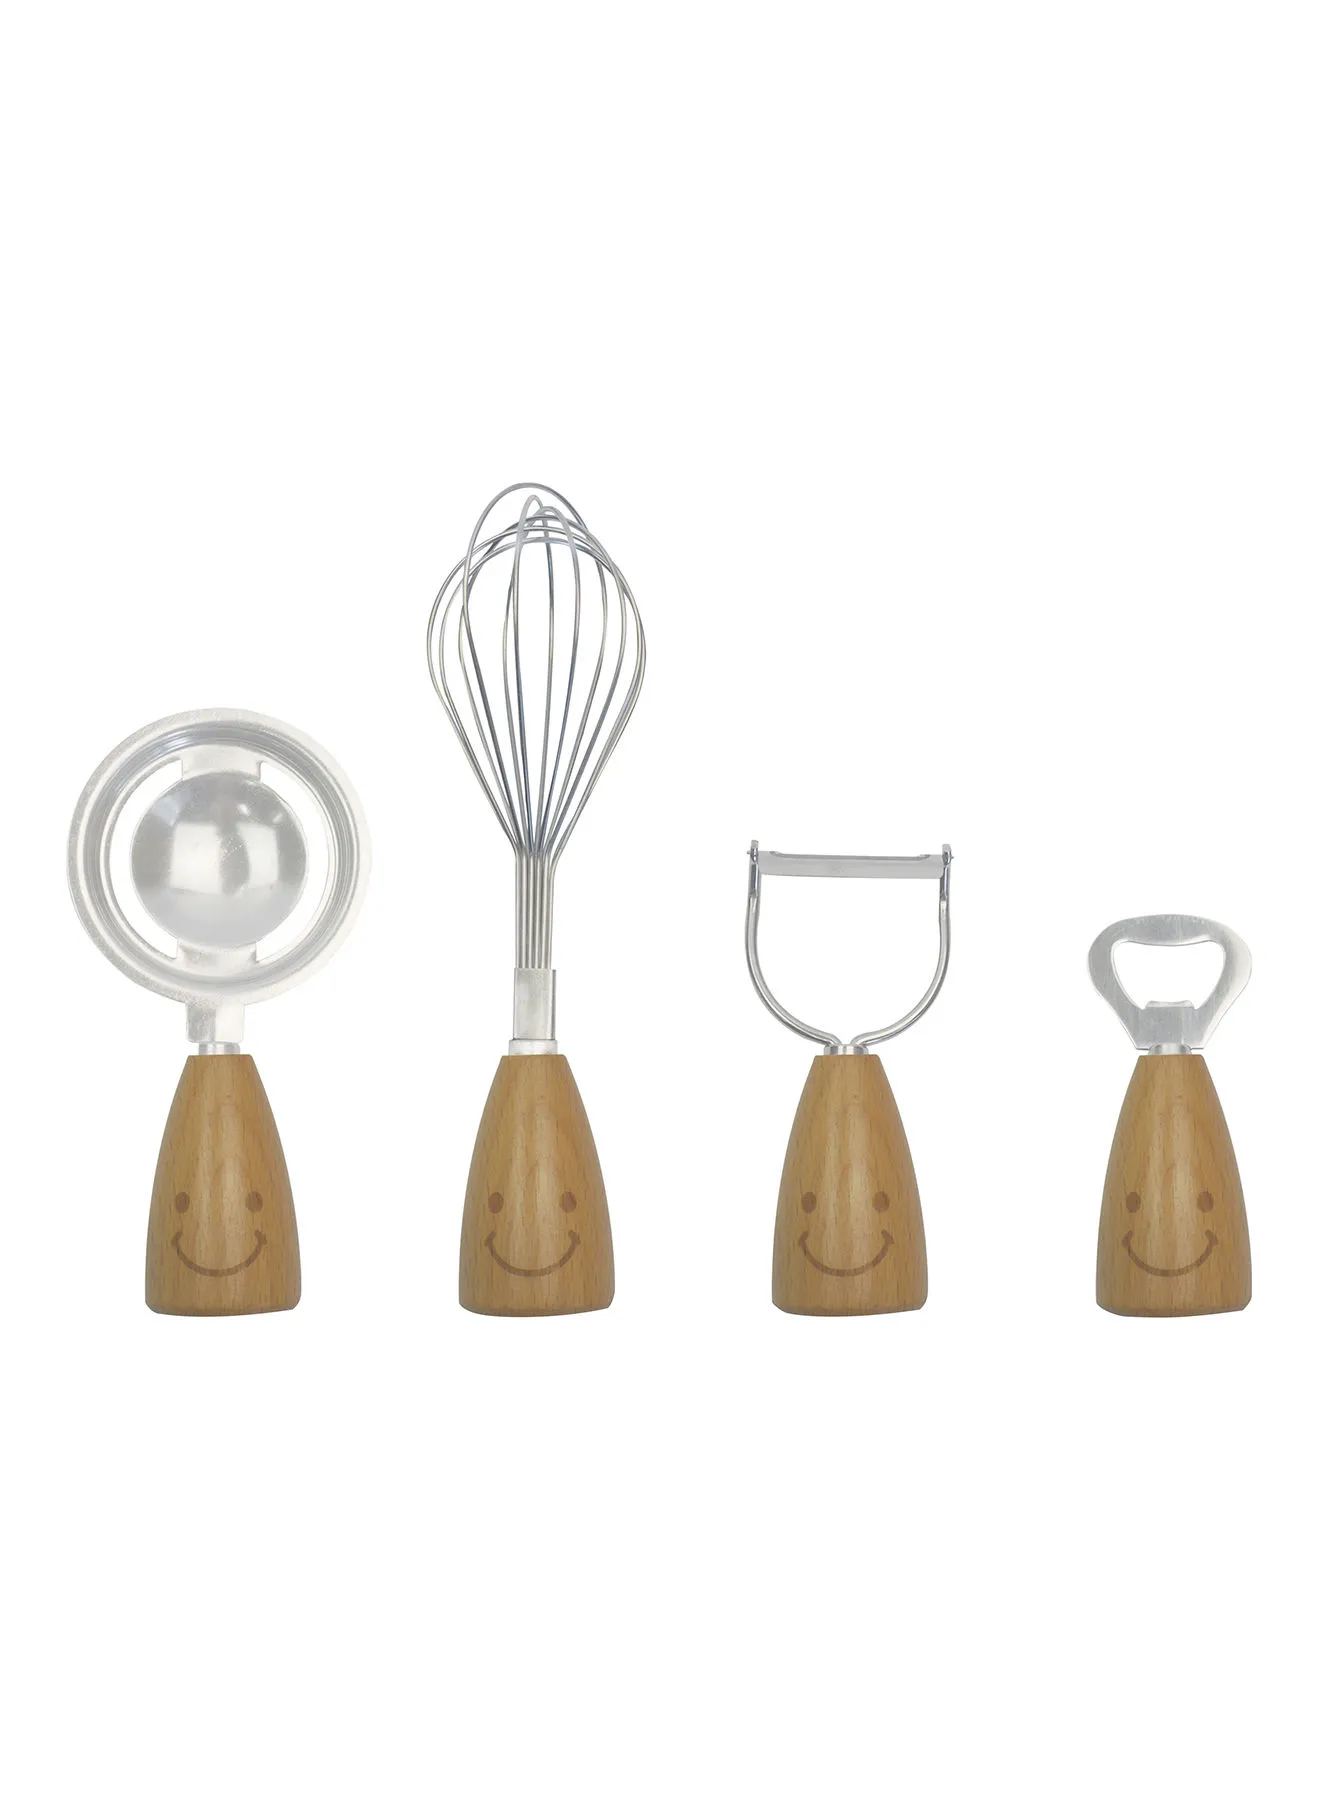 Amal 4 Piece Kitchen Accessories - Made Of Stainless Steel - Stylish Kitchen Tools - With Wooden Handles - Utensils Set - Egg Whisk, Peeler, Opener, Egg Whisk - Brown